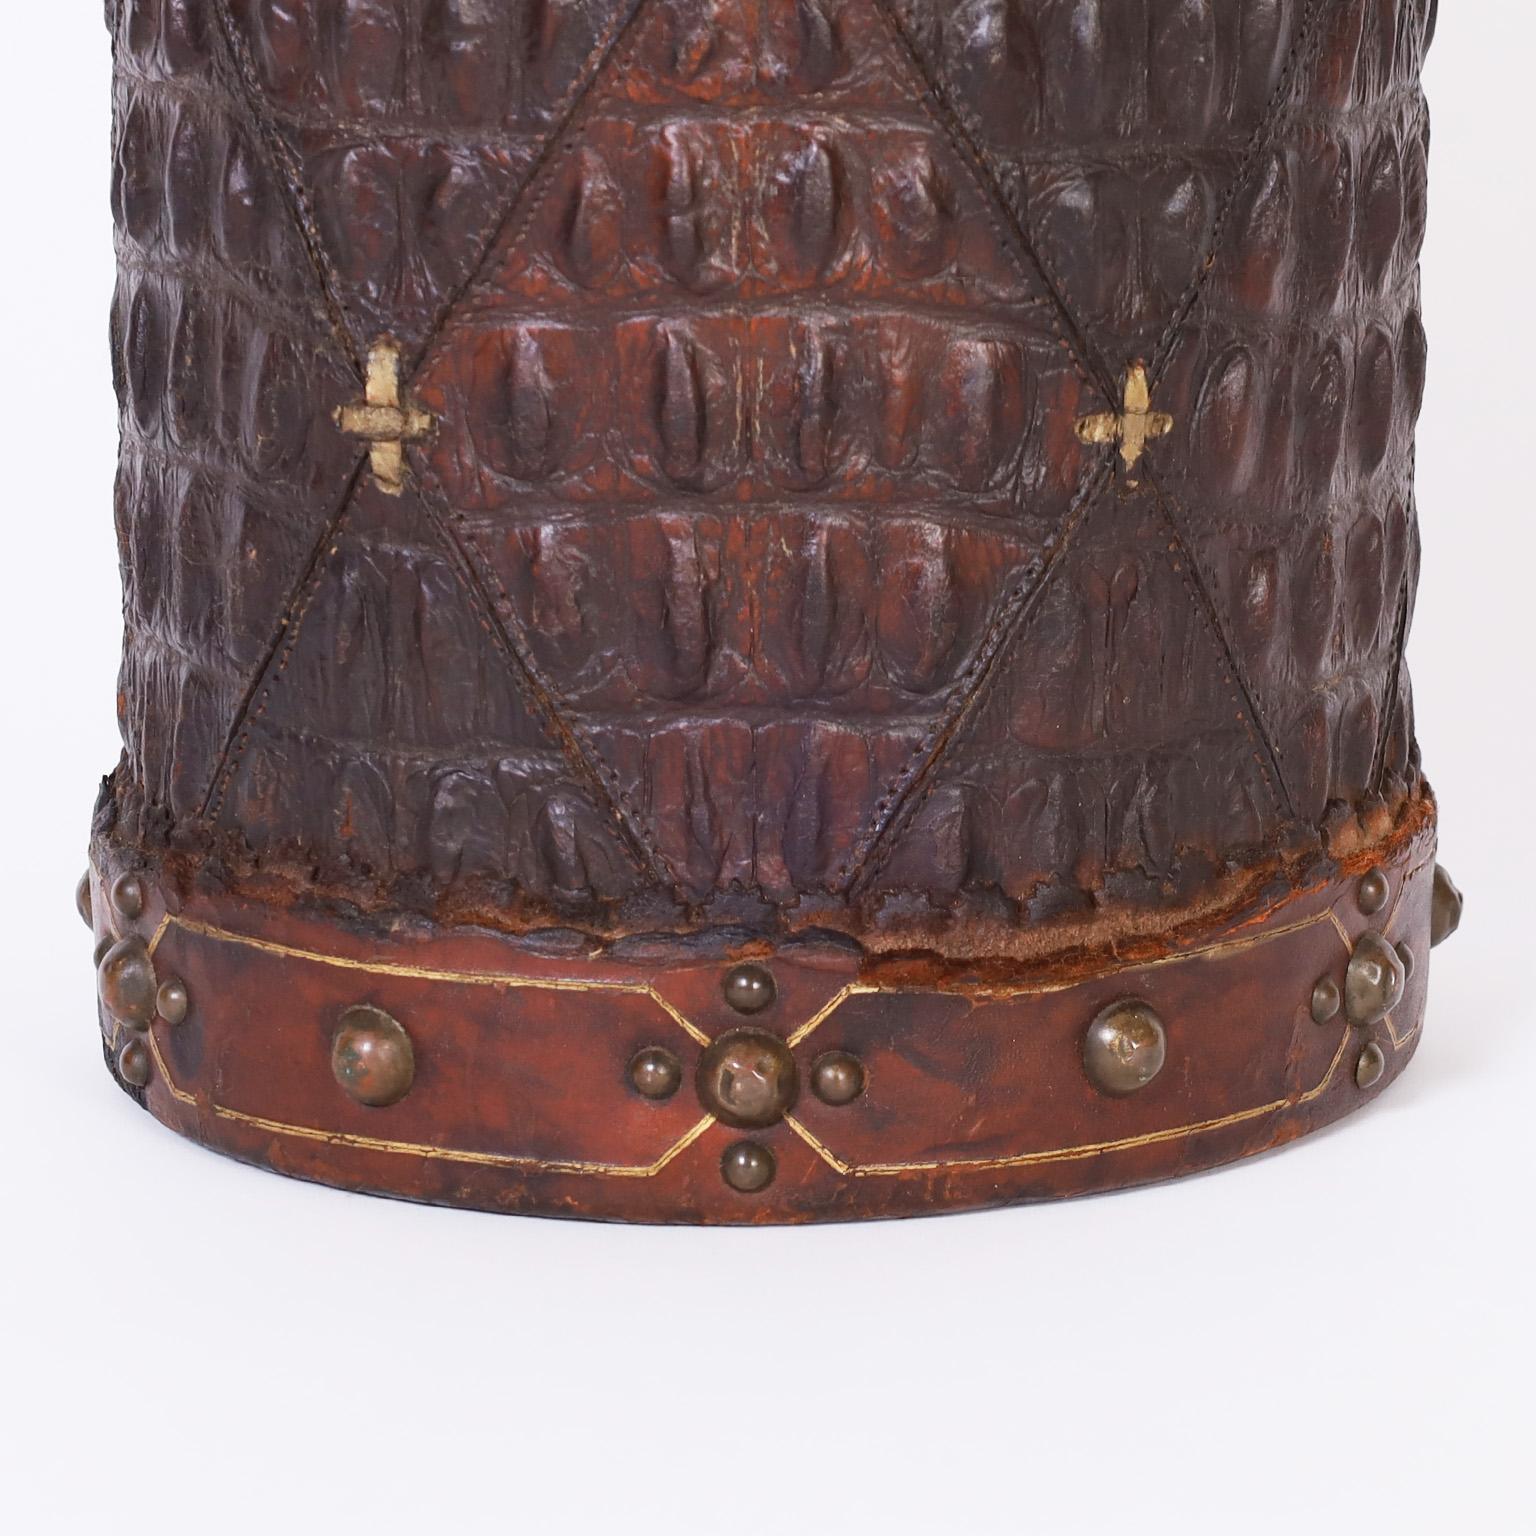 20th Century French Alligator Bin or Canister